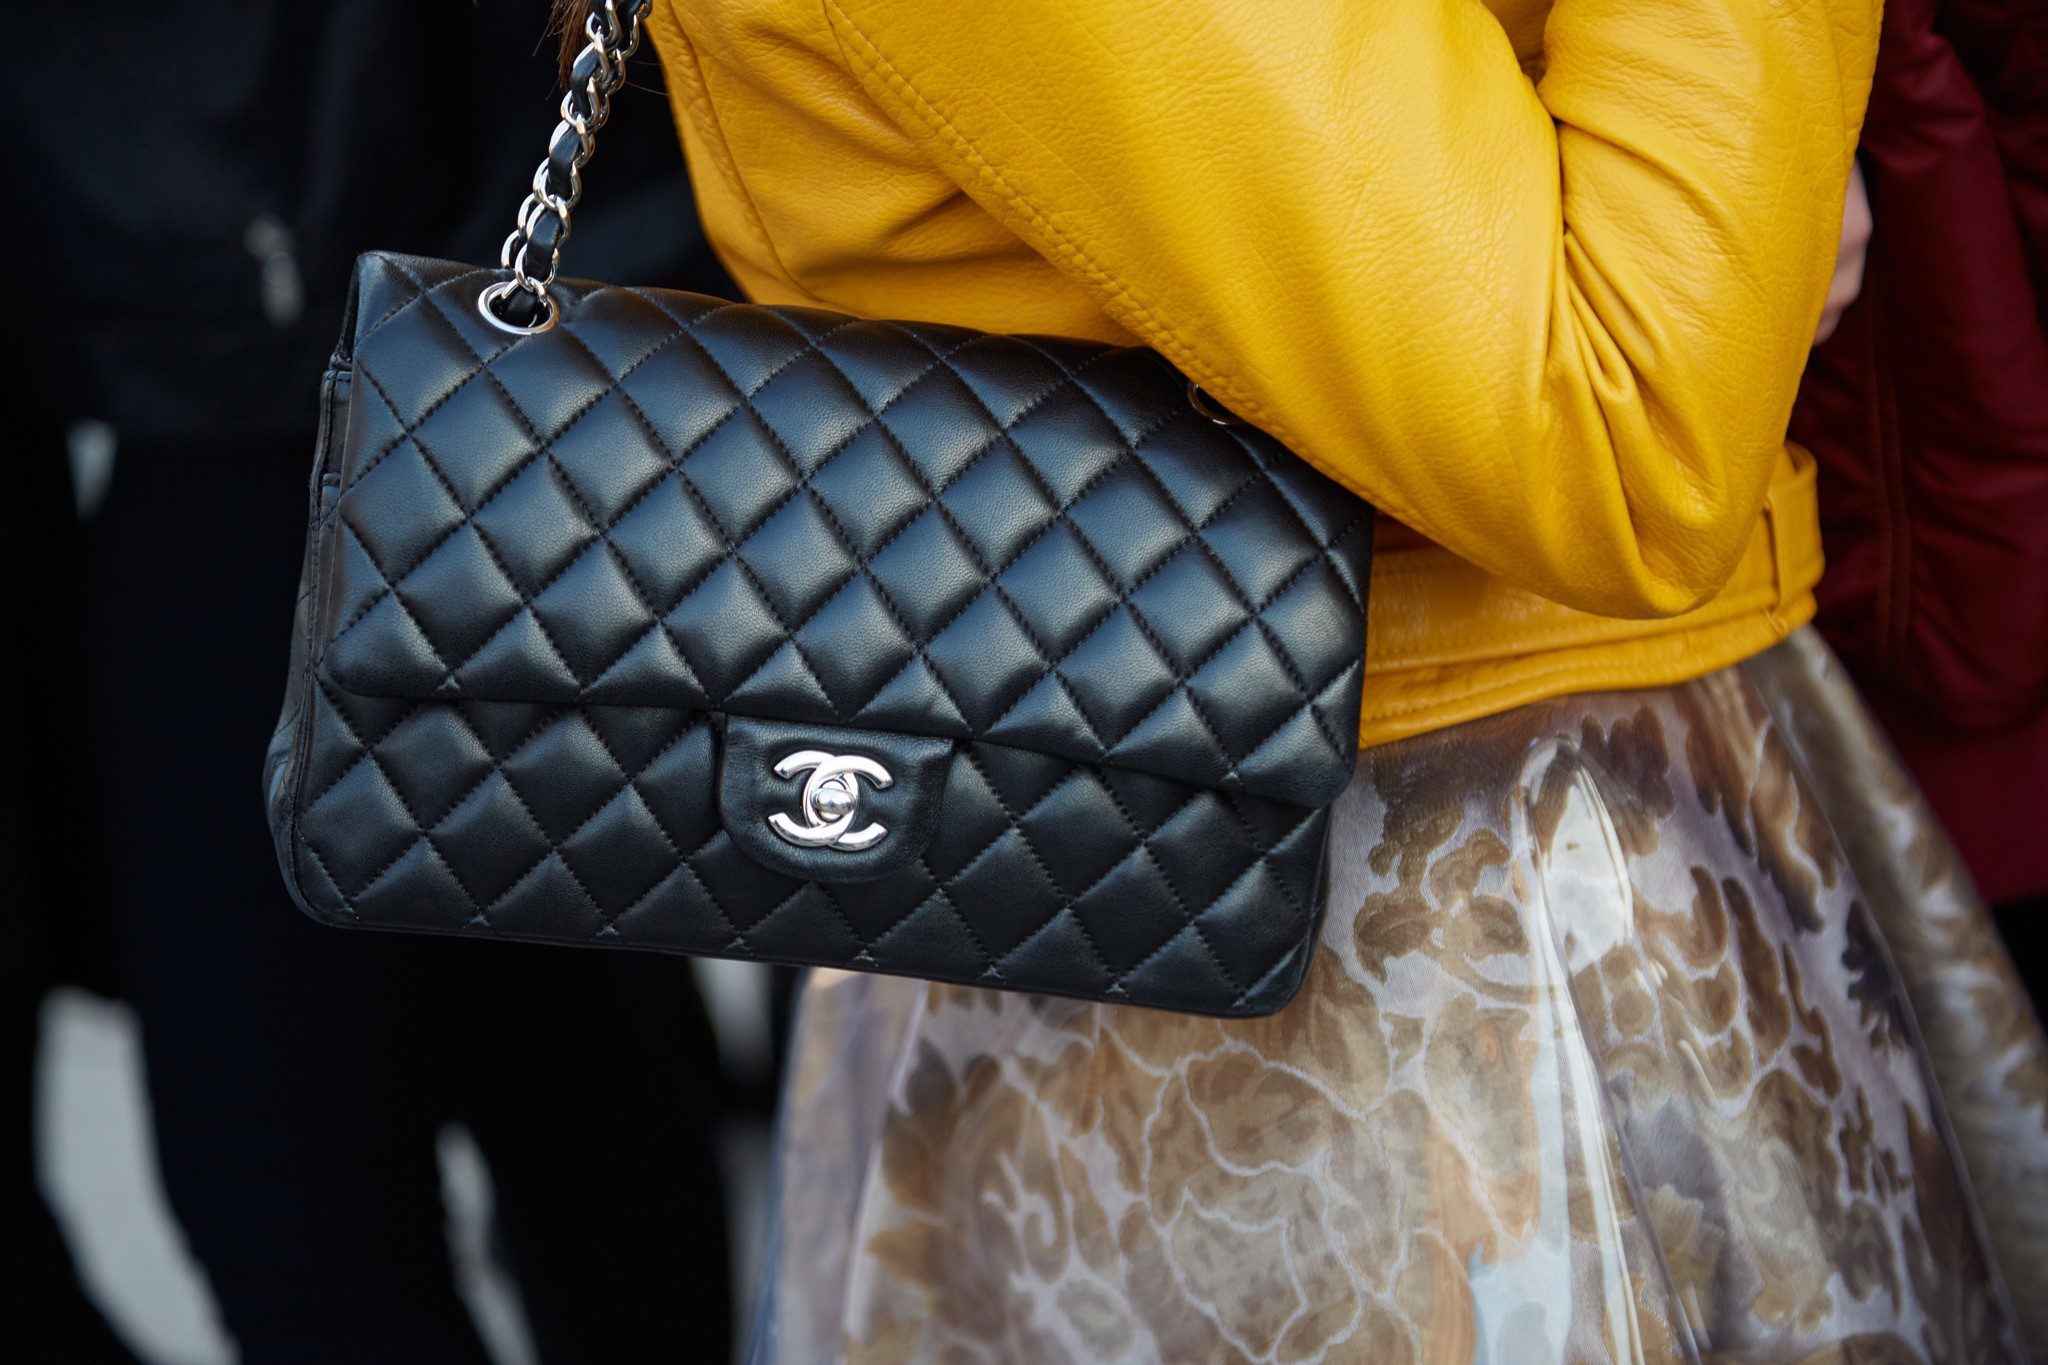 A Short History of the Chanel Classic Flap Bag